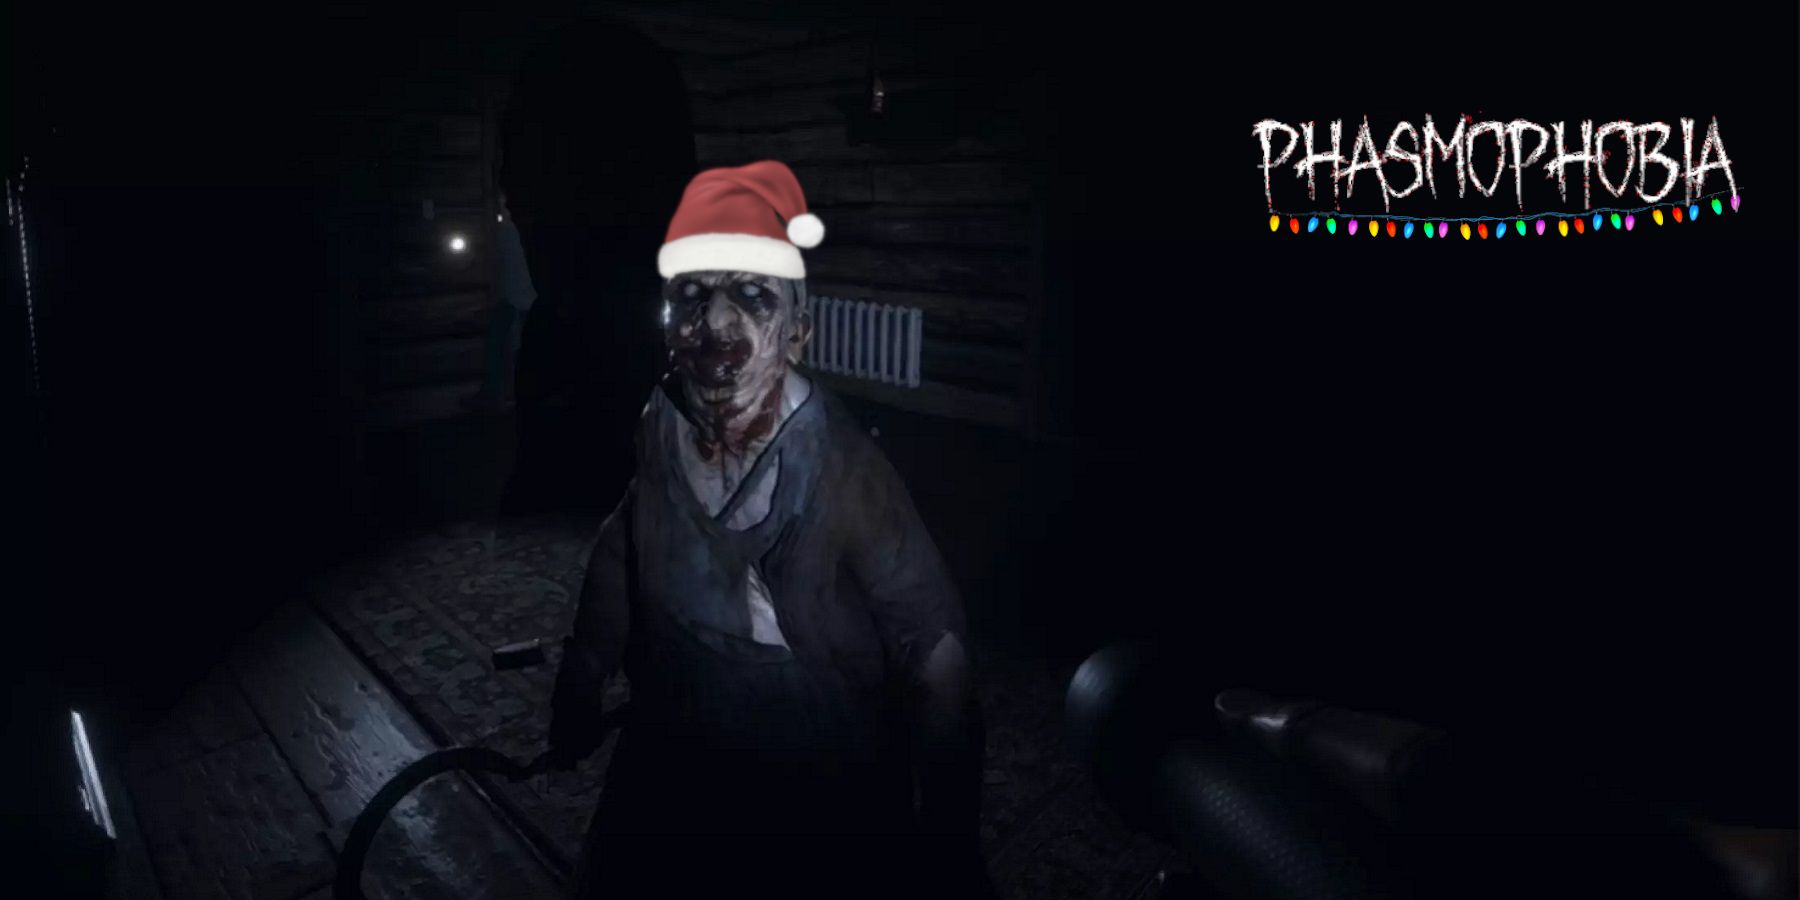 A screenshot from Phasmophobia showing one of the ghosts wearing a Christmas hat.